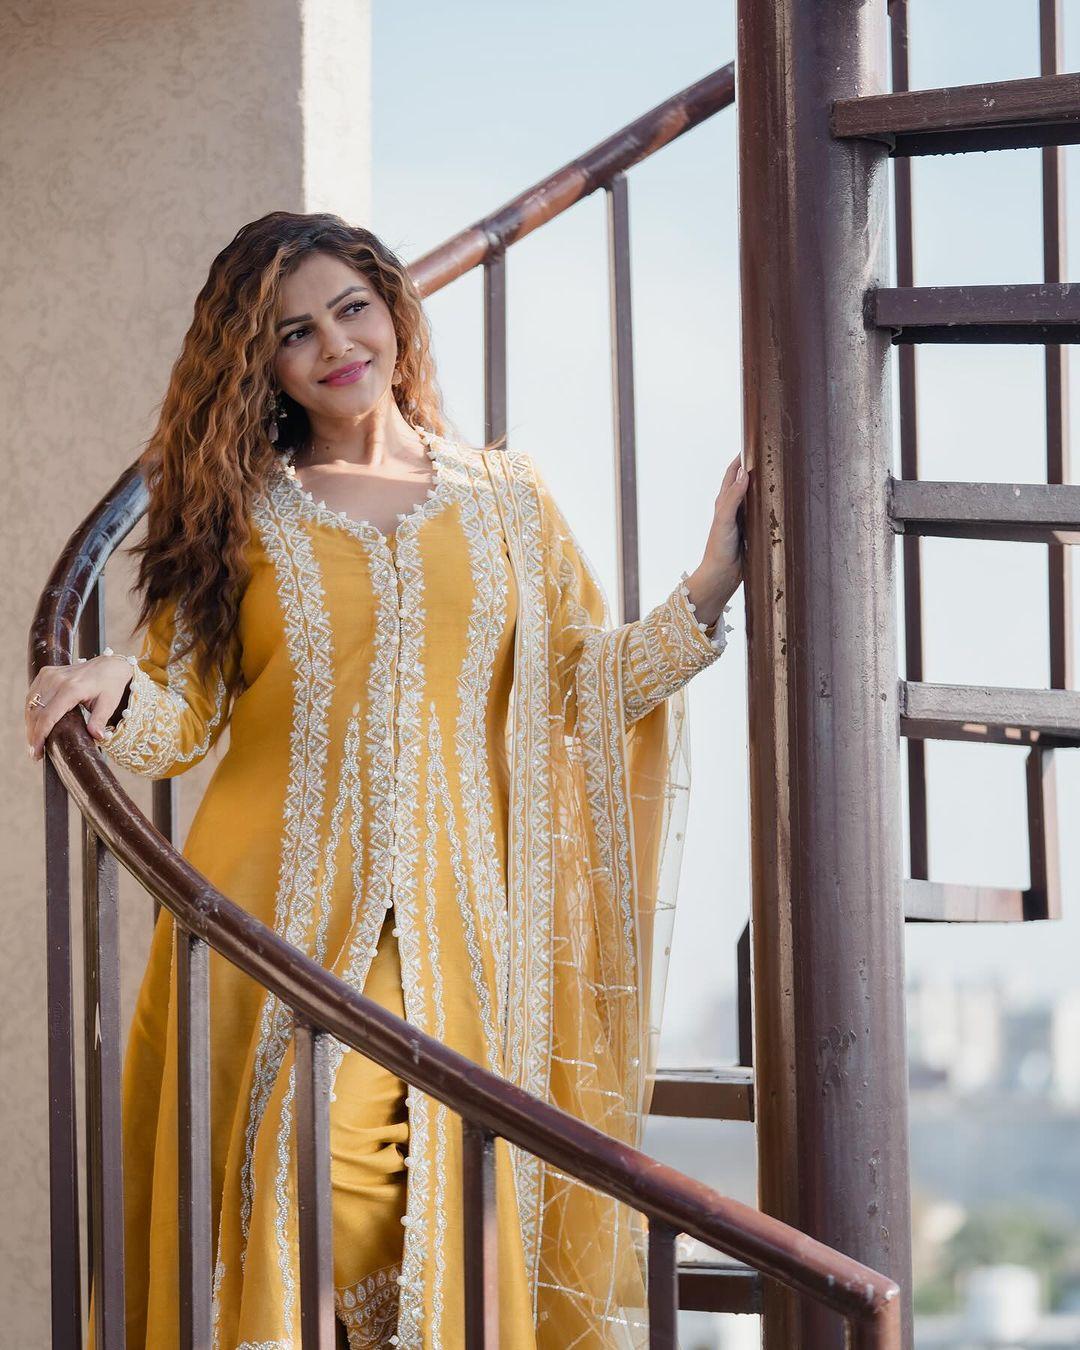 Rubina Dilaik is a diva when it comes to ethnic fashion; each and every look from her wardrobe is a must-have